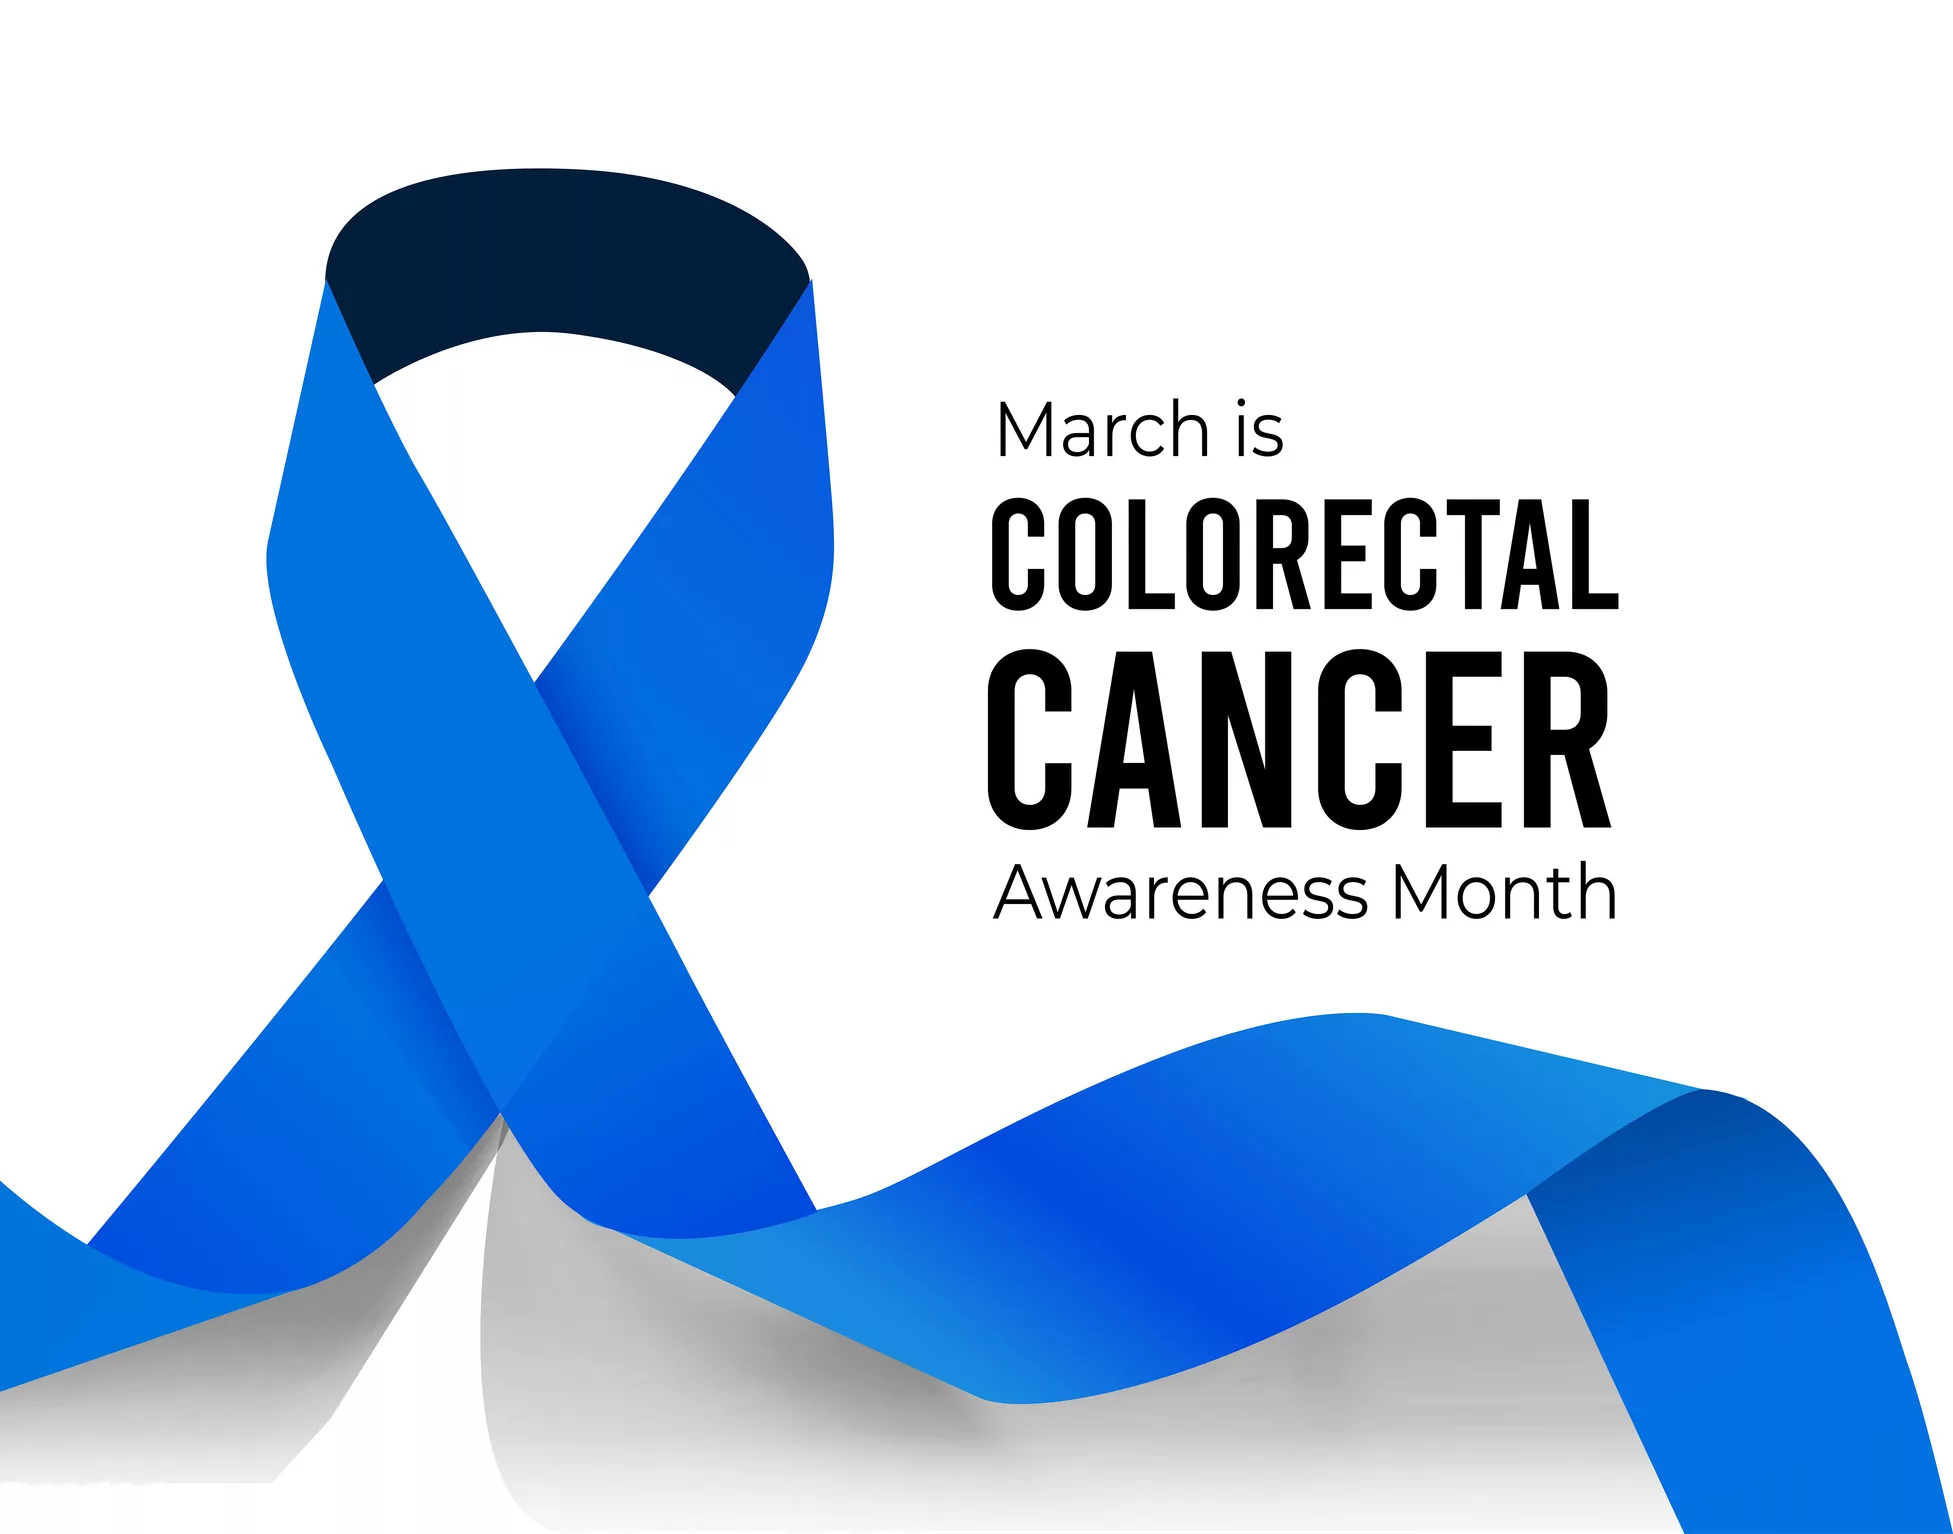 Colorectal Cancer Awareness Month. Vector illustration on white